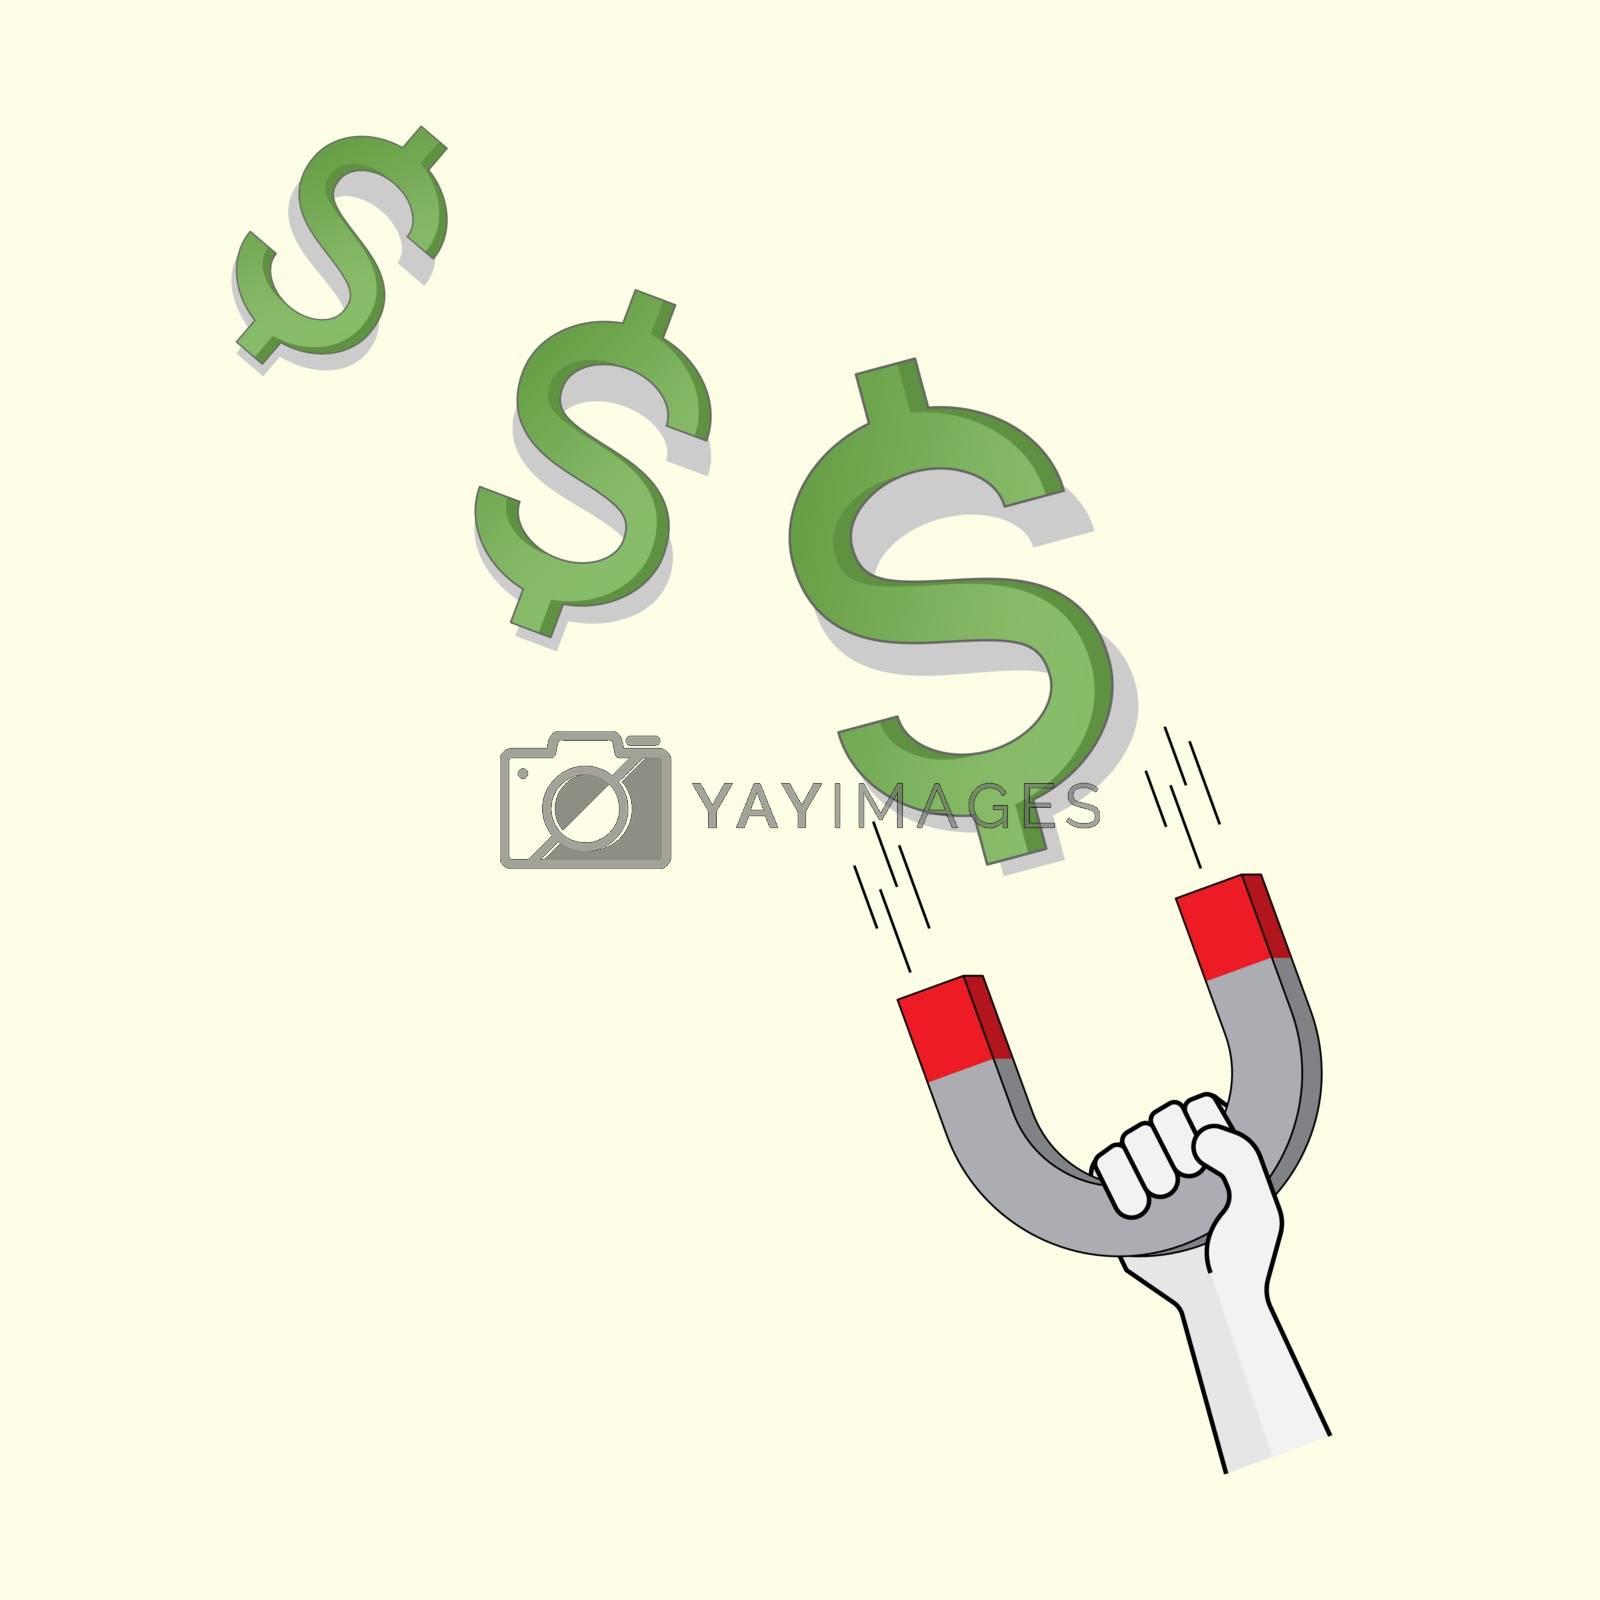 Royalty free image of Attract Money by Chiamsakul